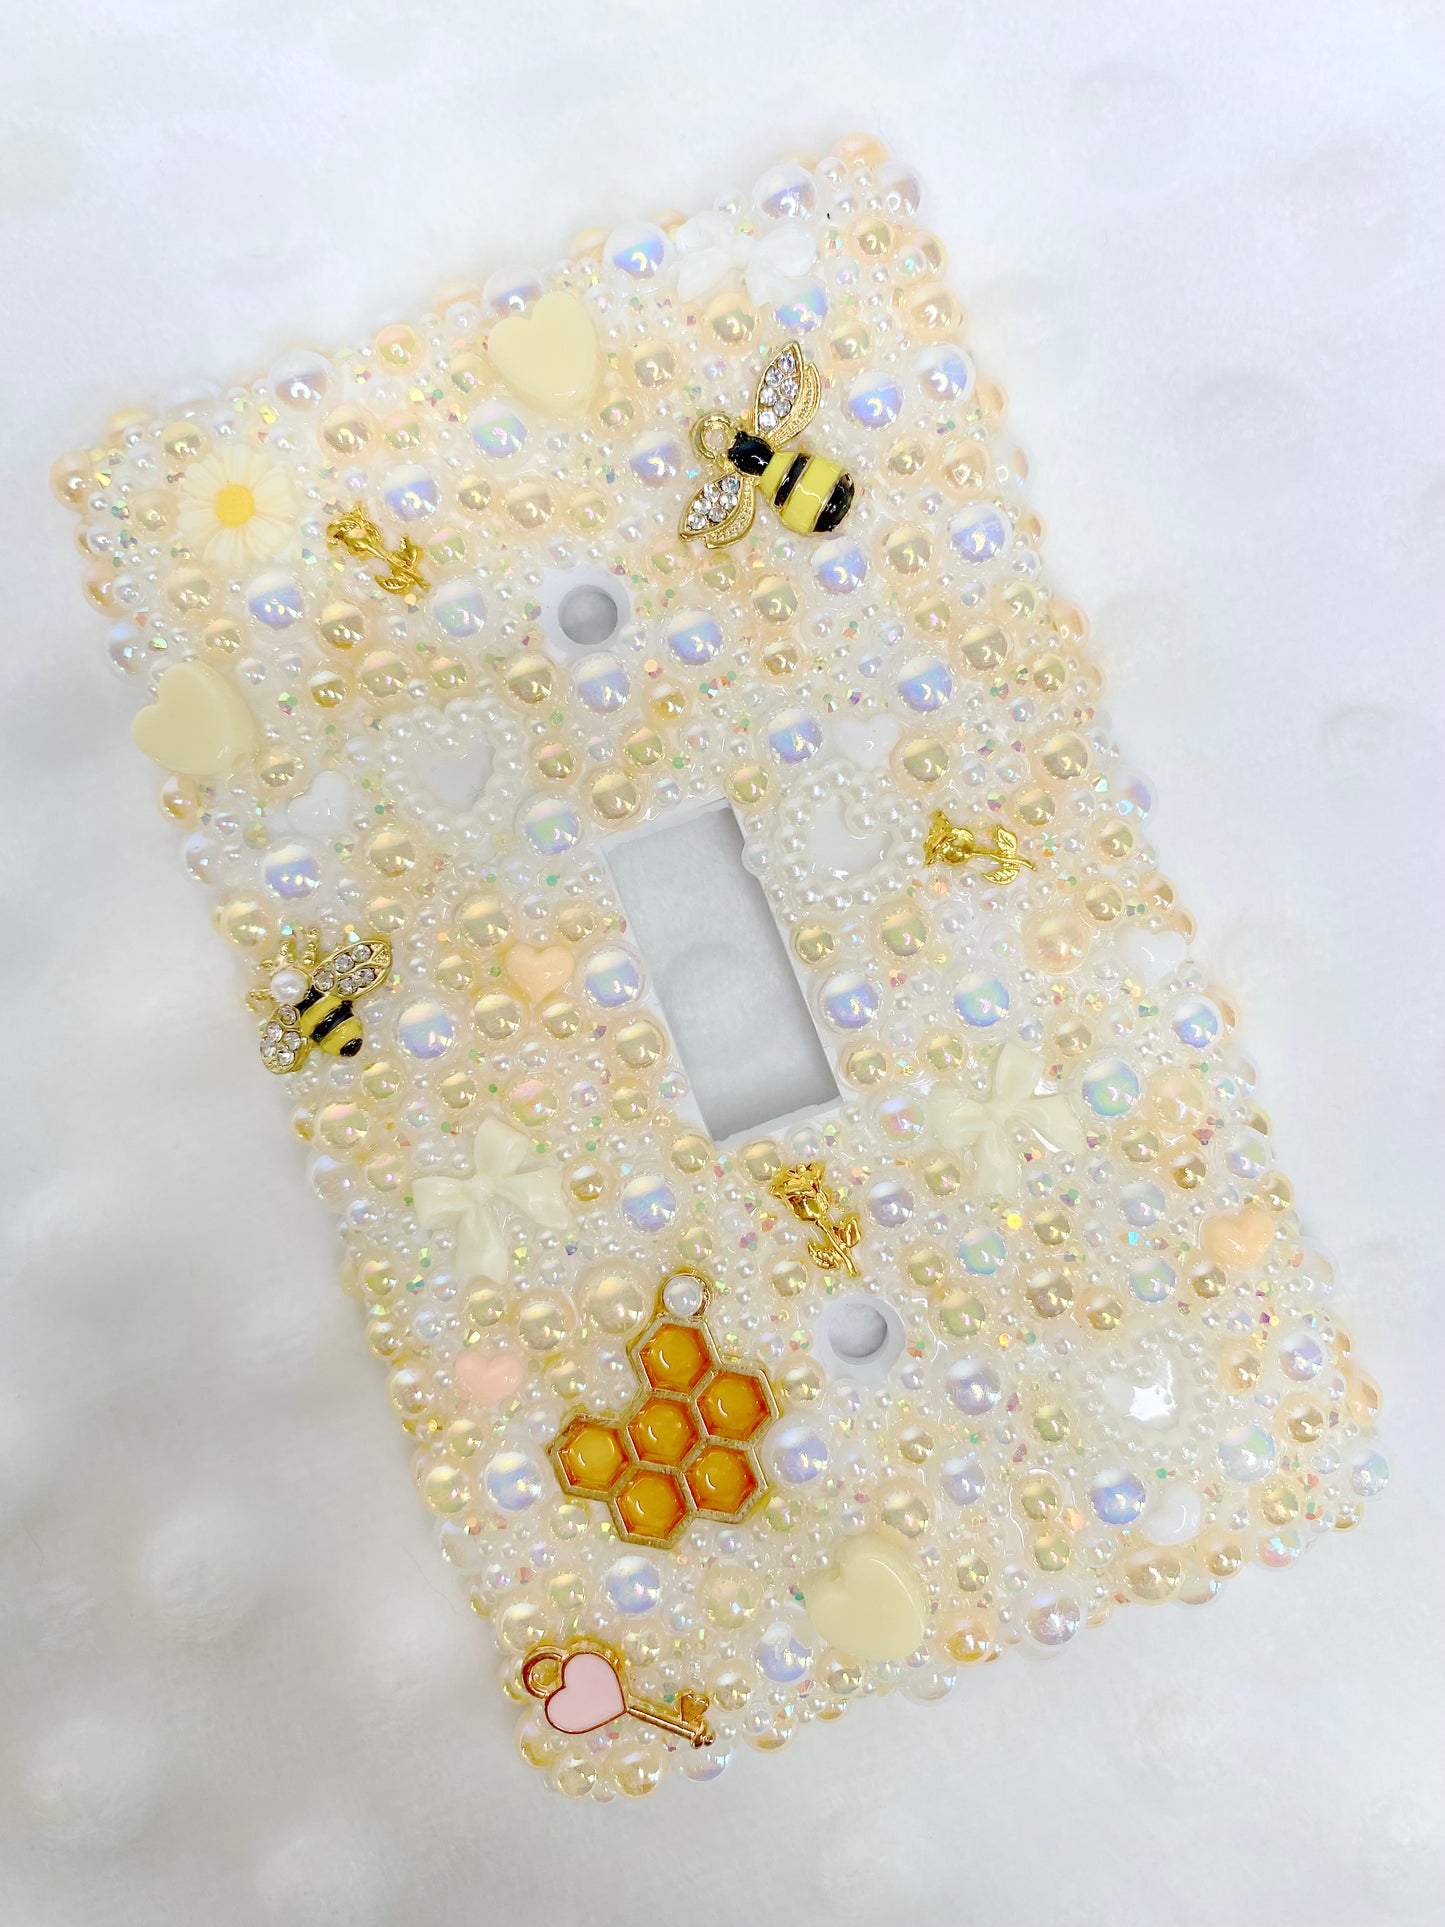 Honey Bees - Light Switch Cover